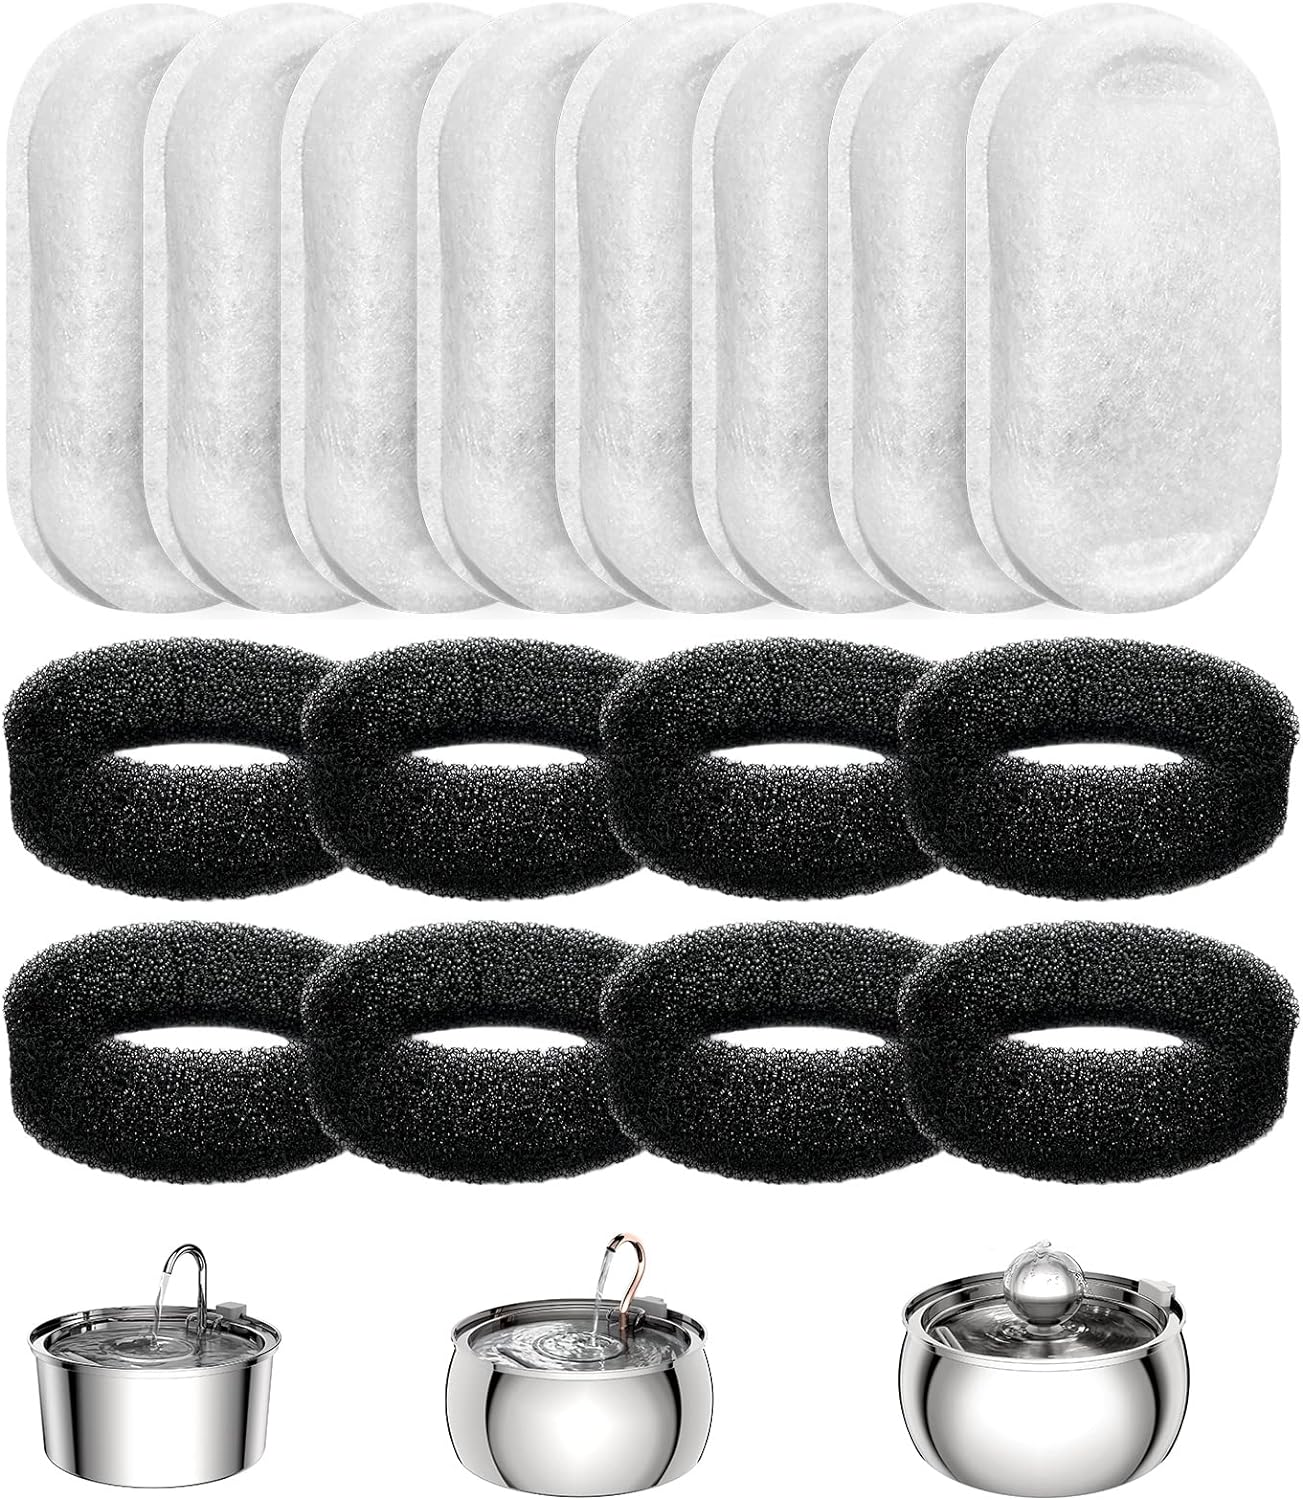 Tomxcute 8 Packs Filters & 8 Sponges Foam Filters for 108oz/3.2L and 135oz/4.0L Adjustable Water Flow Pet Water Fountain